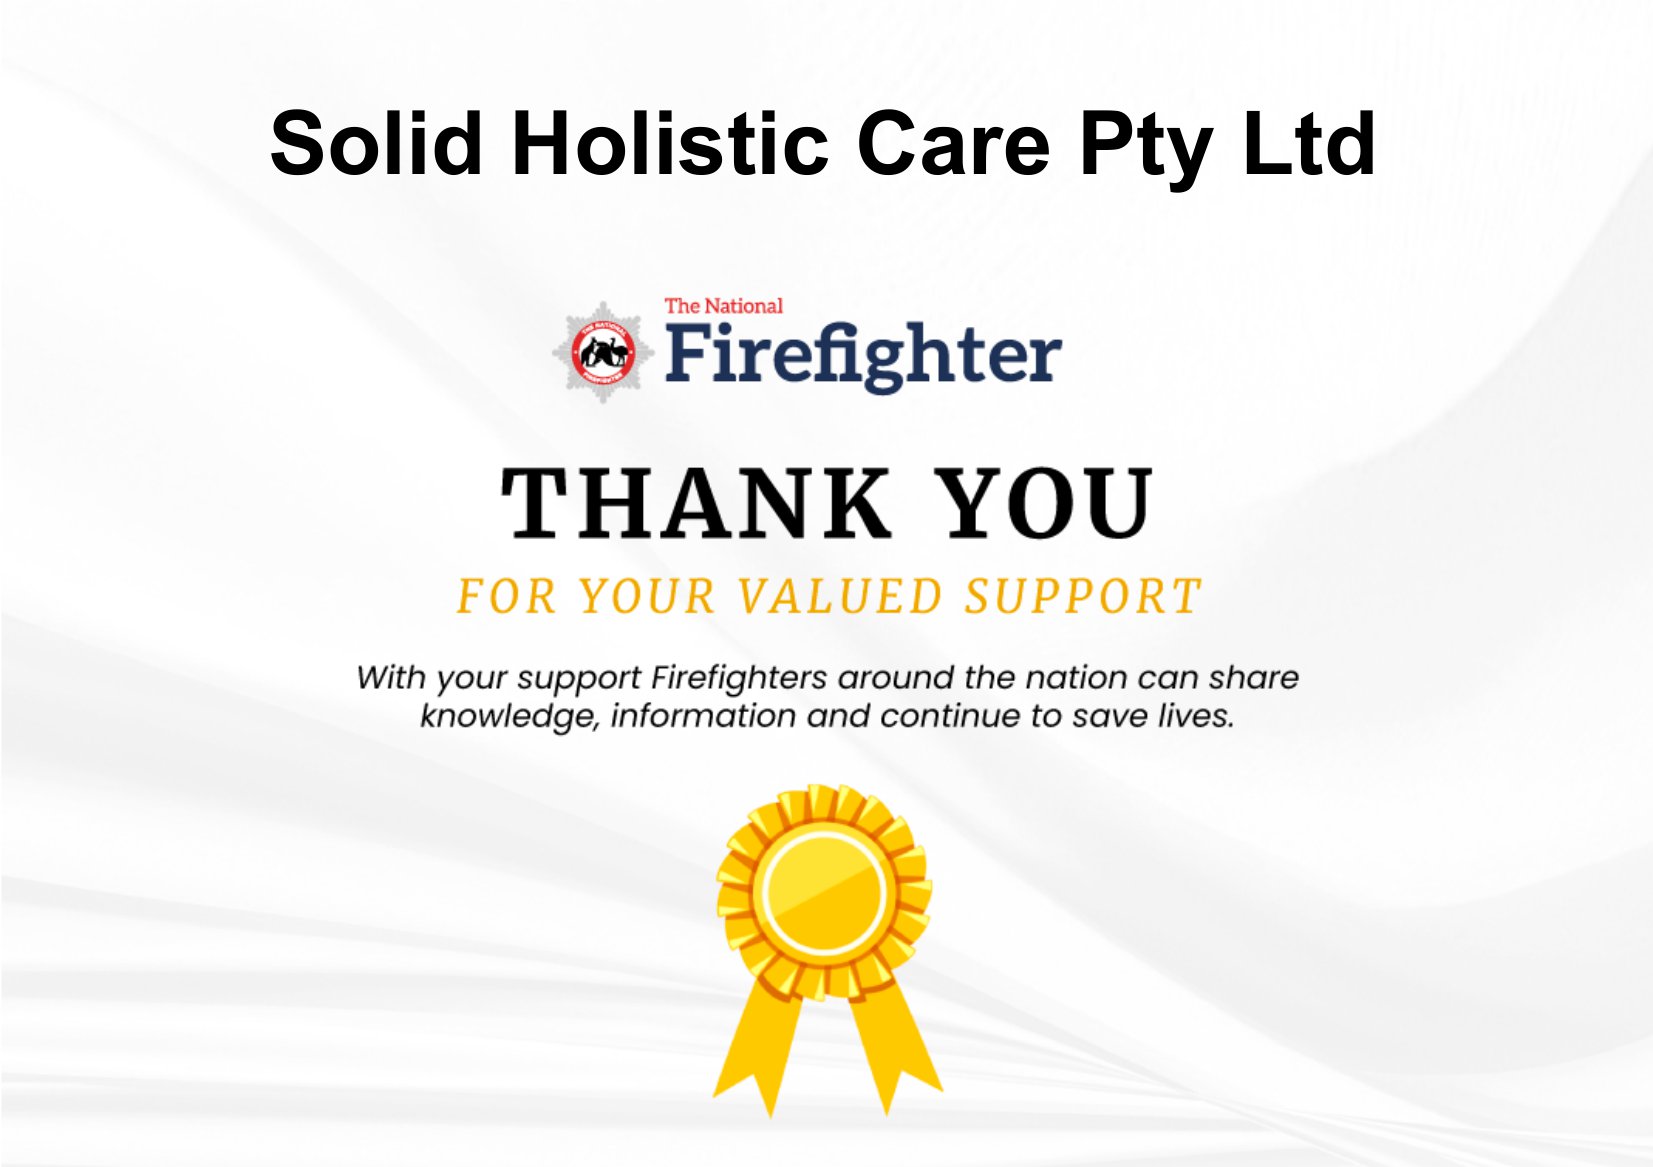 Firefighter support